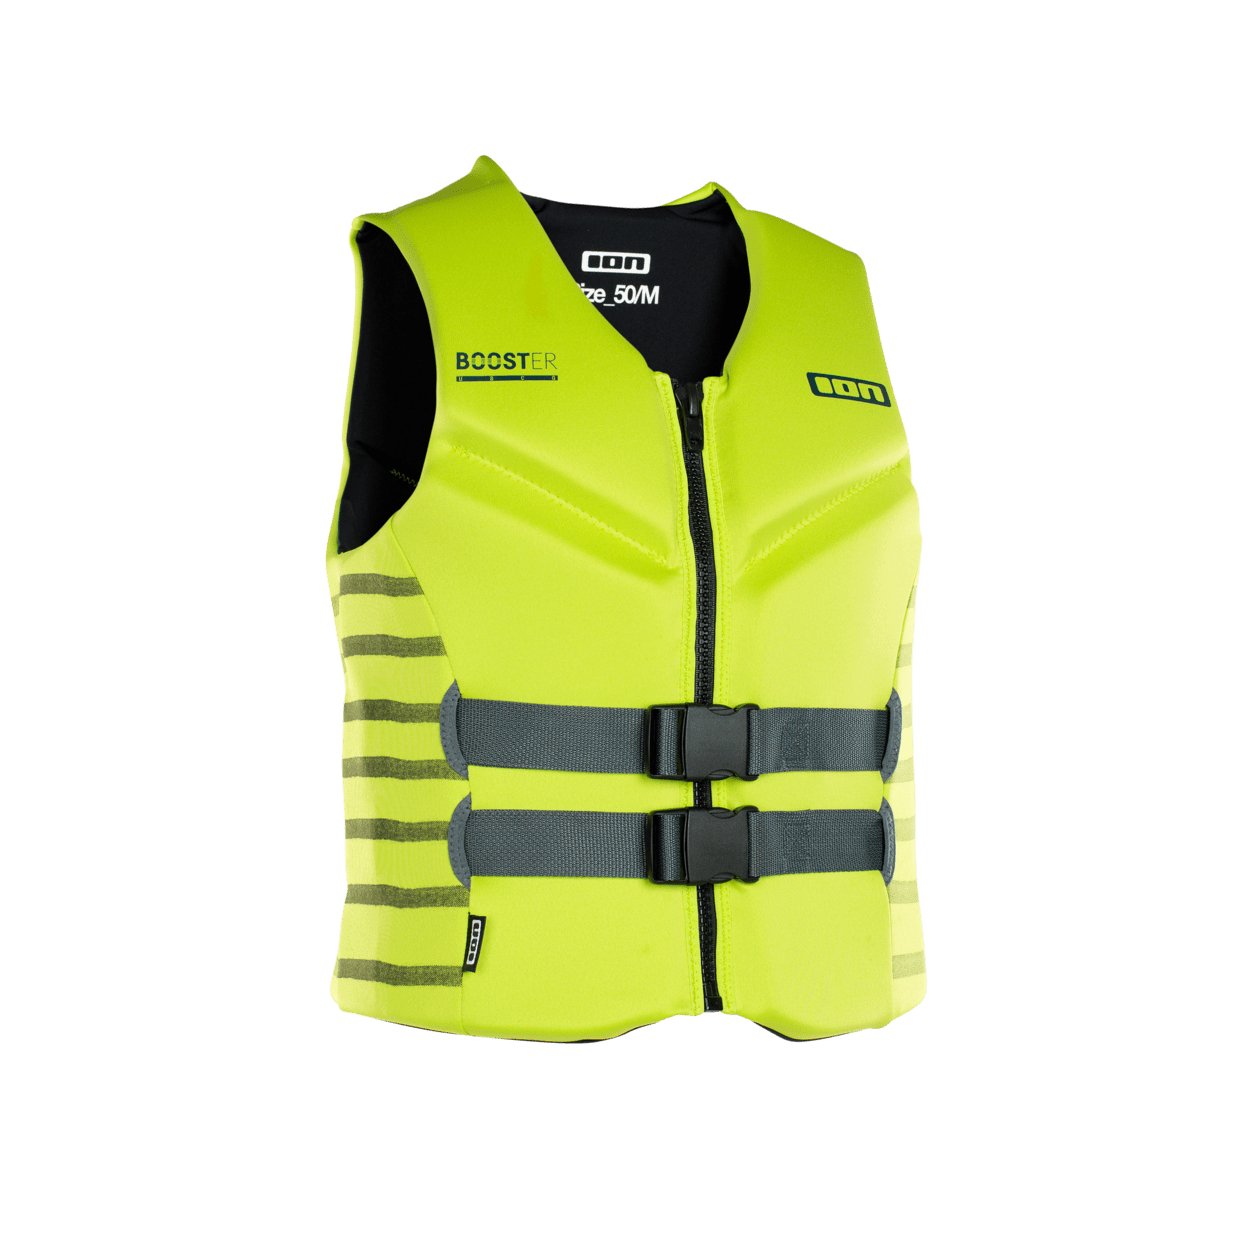 ION Booster Vest 50N Front Zip 2022 - Worthing Watersports - 9008415982479 - Protection - ION Water